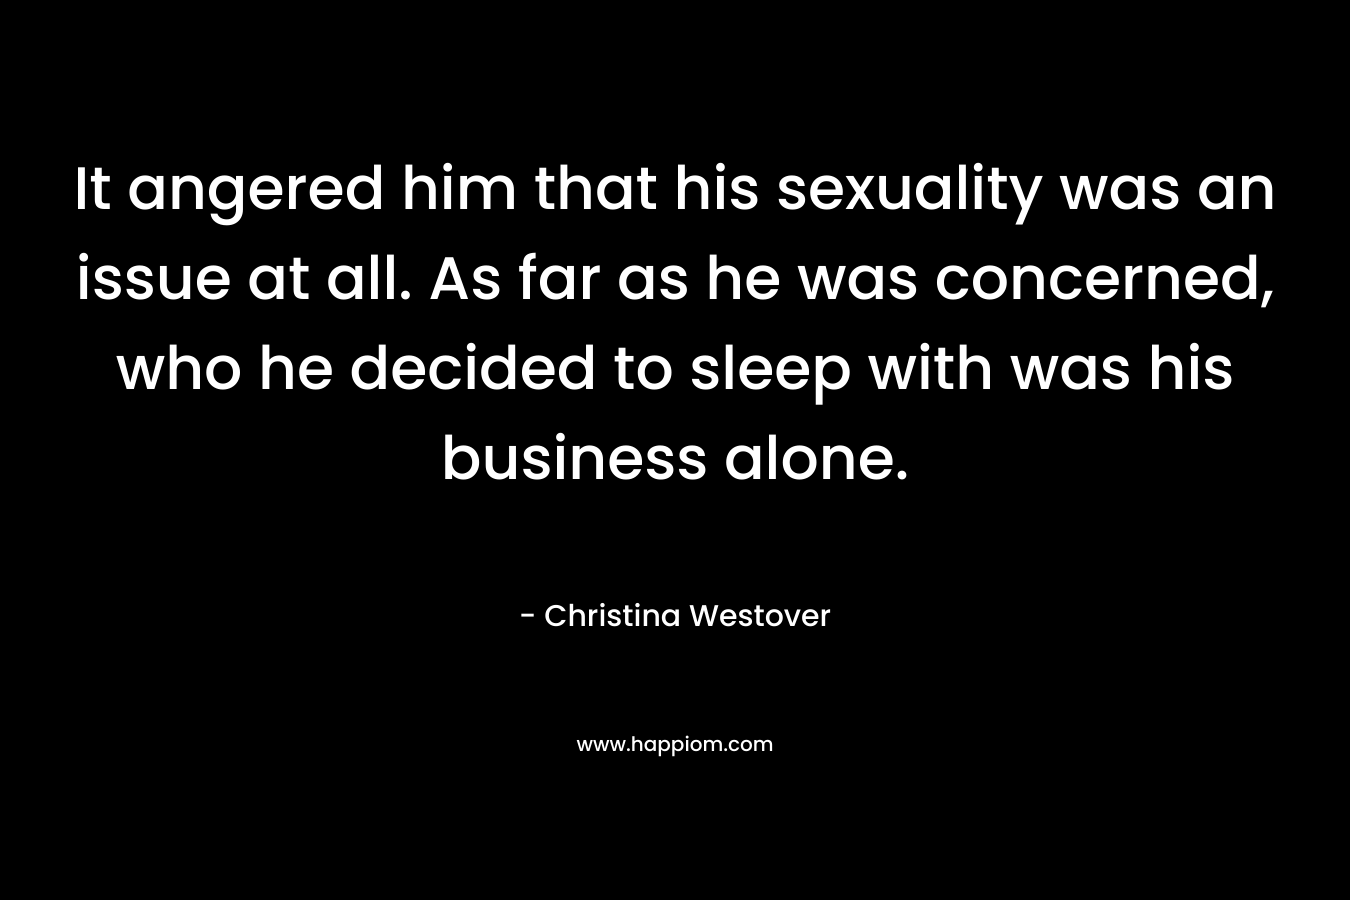 It angered him that his sexuality was an issue at all. As far as he was concerned, who he decided to sleep with was his business alone. – Christina Westover